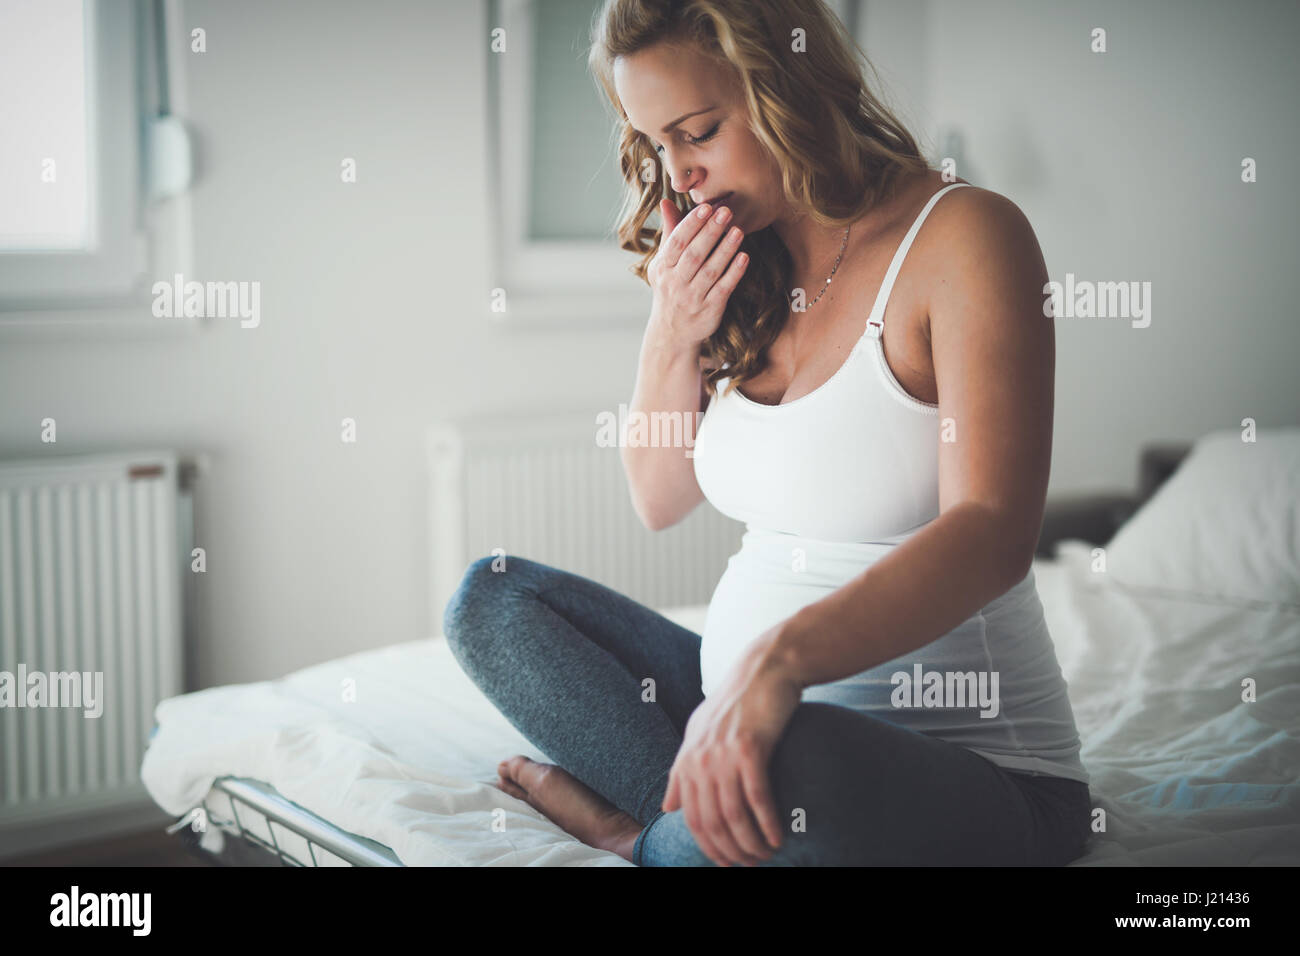 Beautiful expectant pregnant woman suffering from nausea Stock Photo